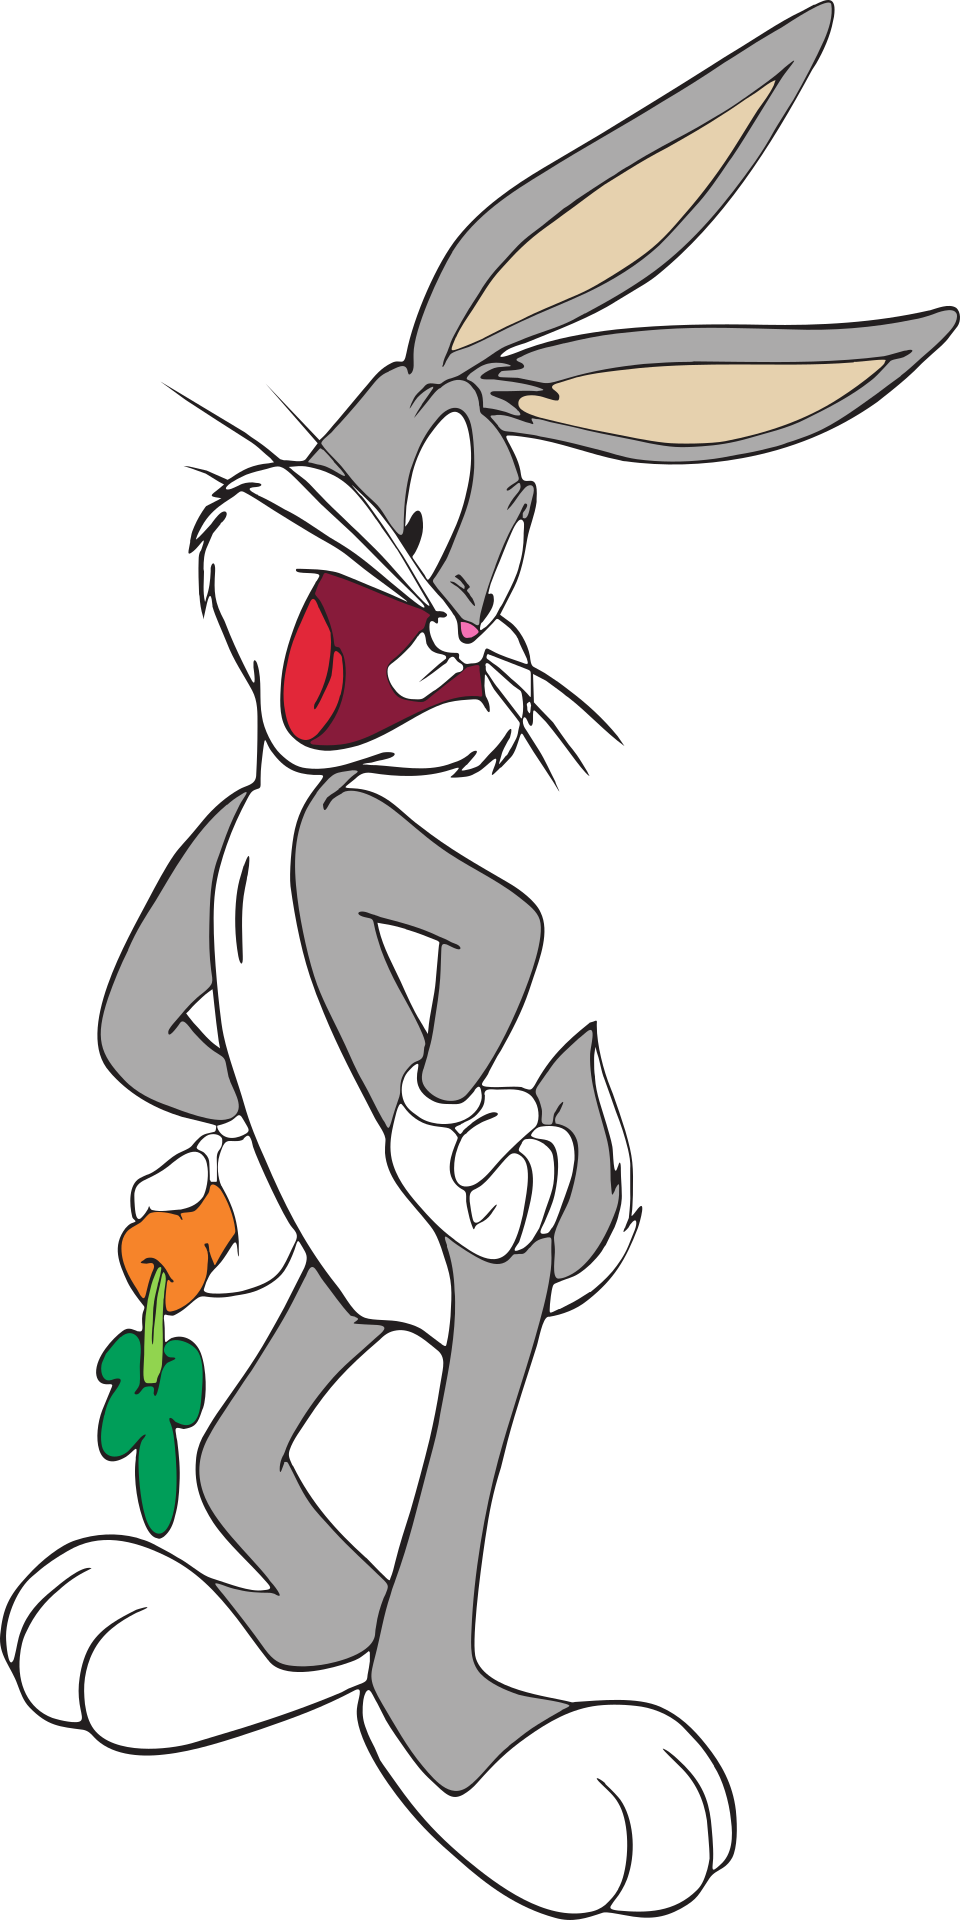 Download Bugs Bunny Logo PNG and Vector (PDF, SVG, Ai, EPS) Free